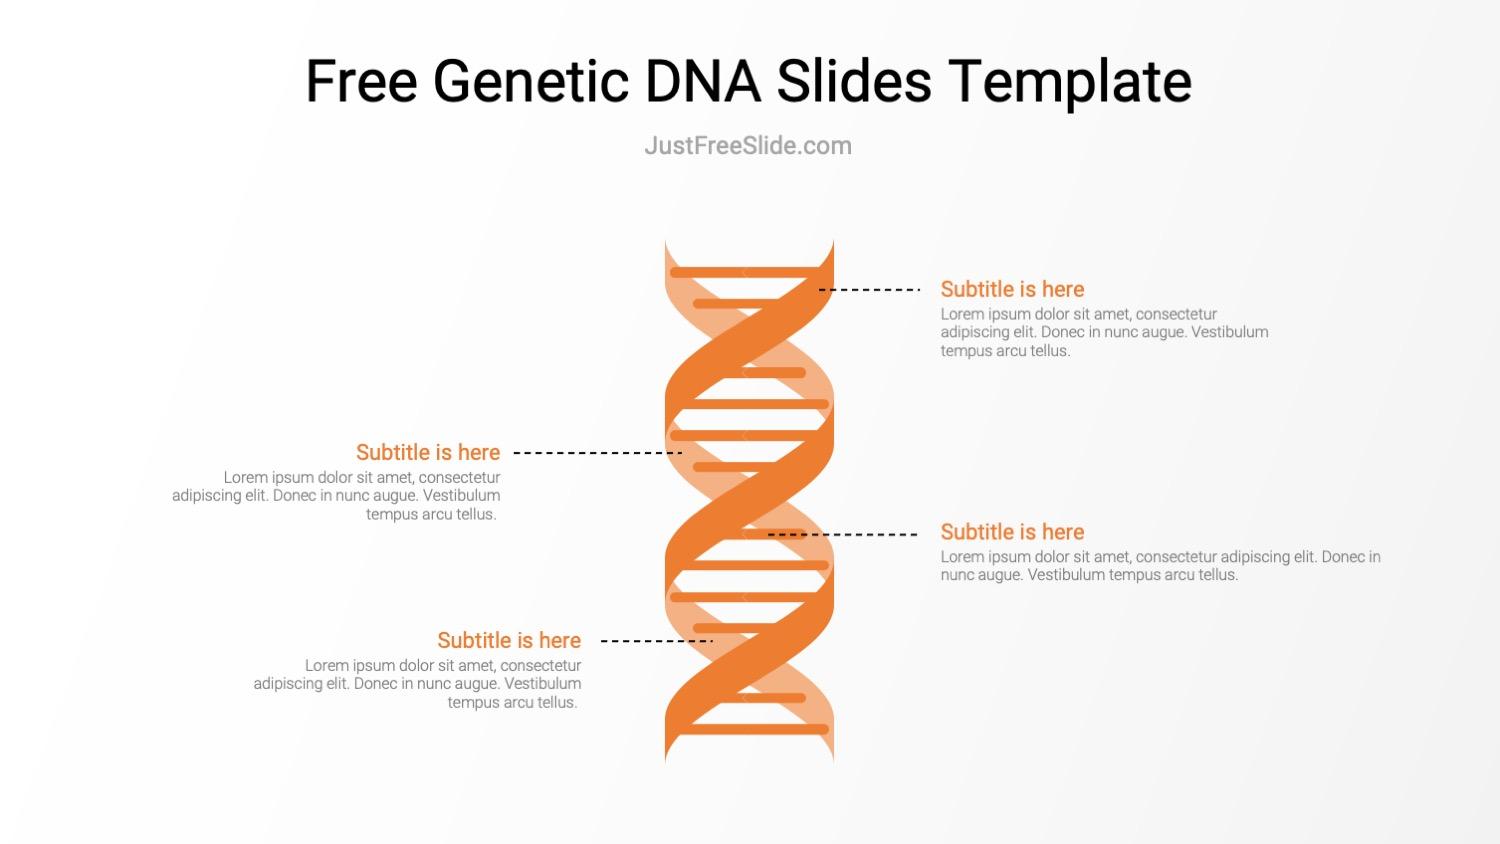 Free Genetic DNA Slides Template